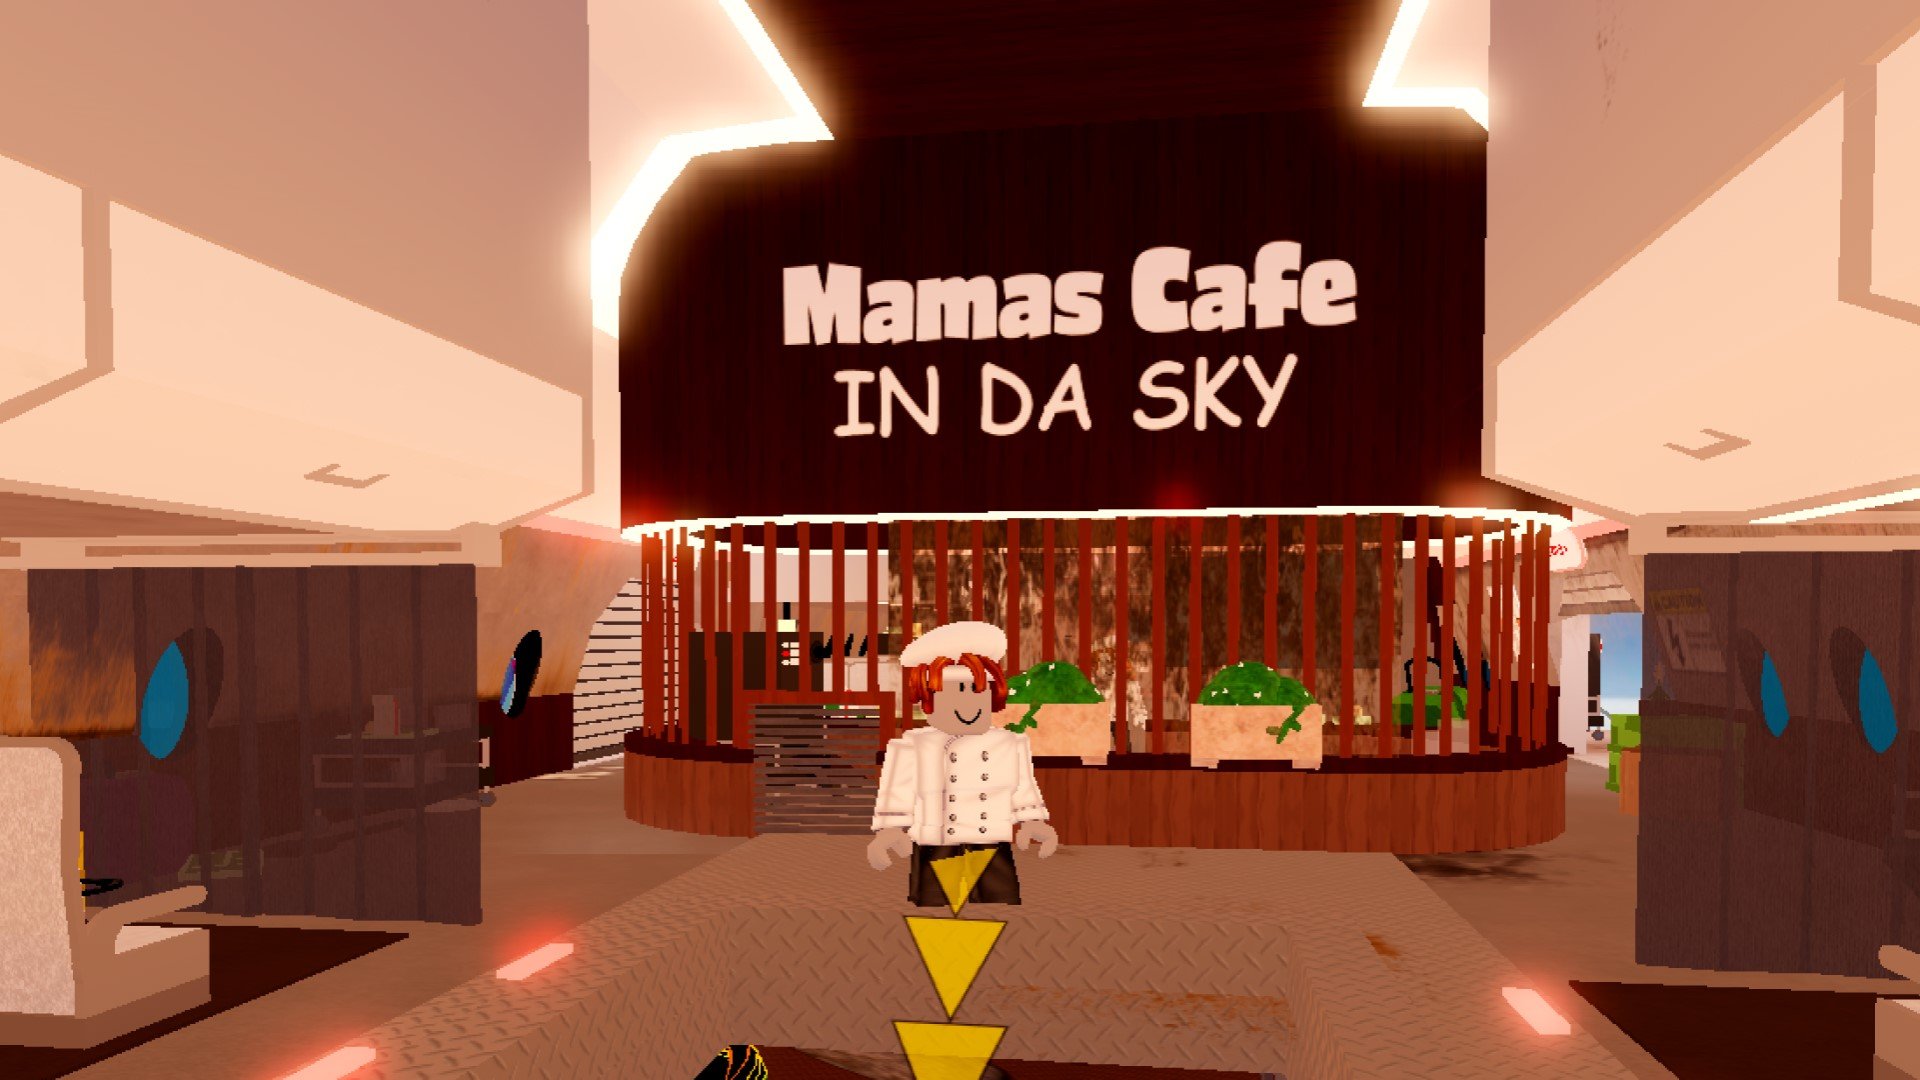 A character from the Roblox game Bake Da Baby. They're shown wearing a chef outfit, standing in front of a restaurant labelled 'Mamas Cafe in da sky'.